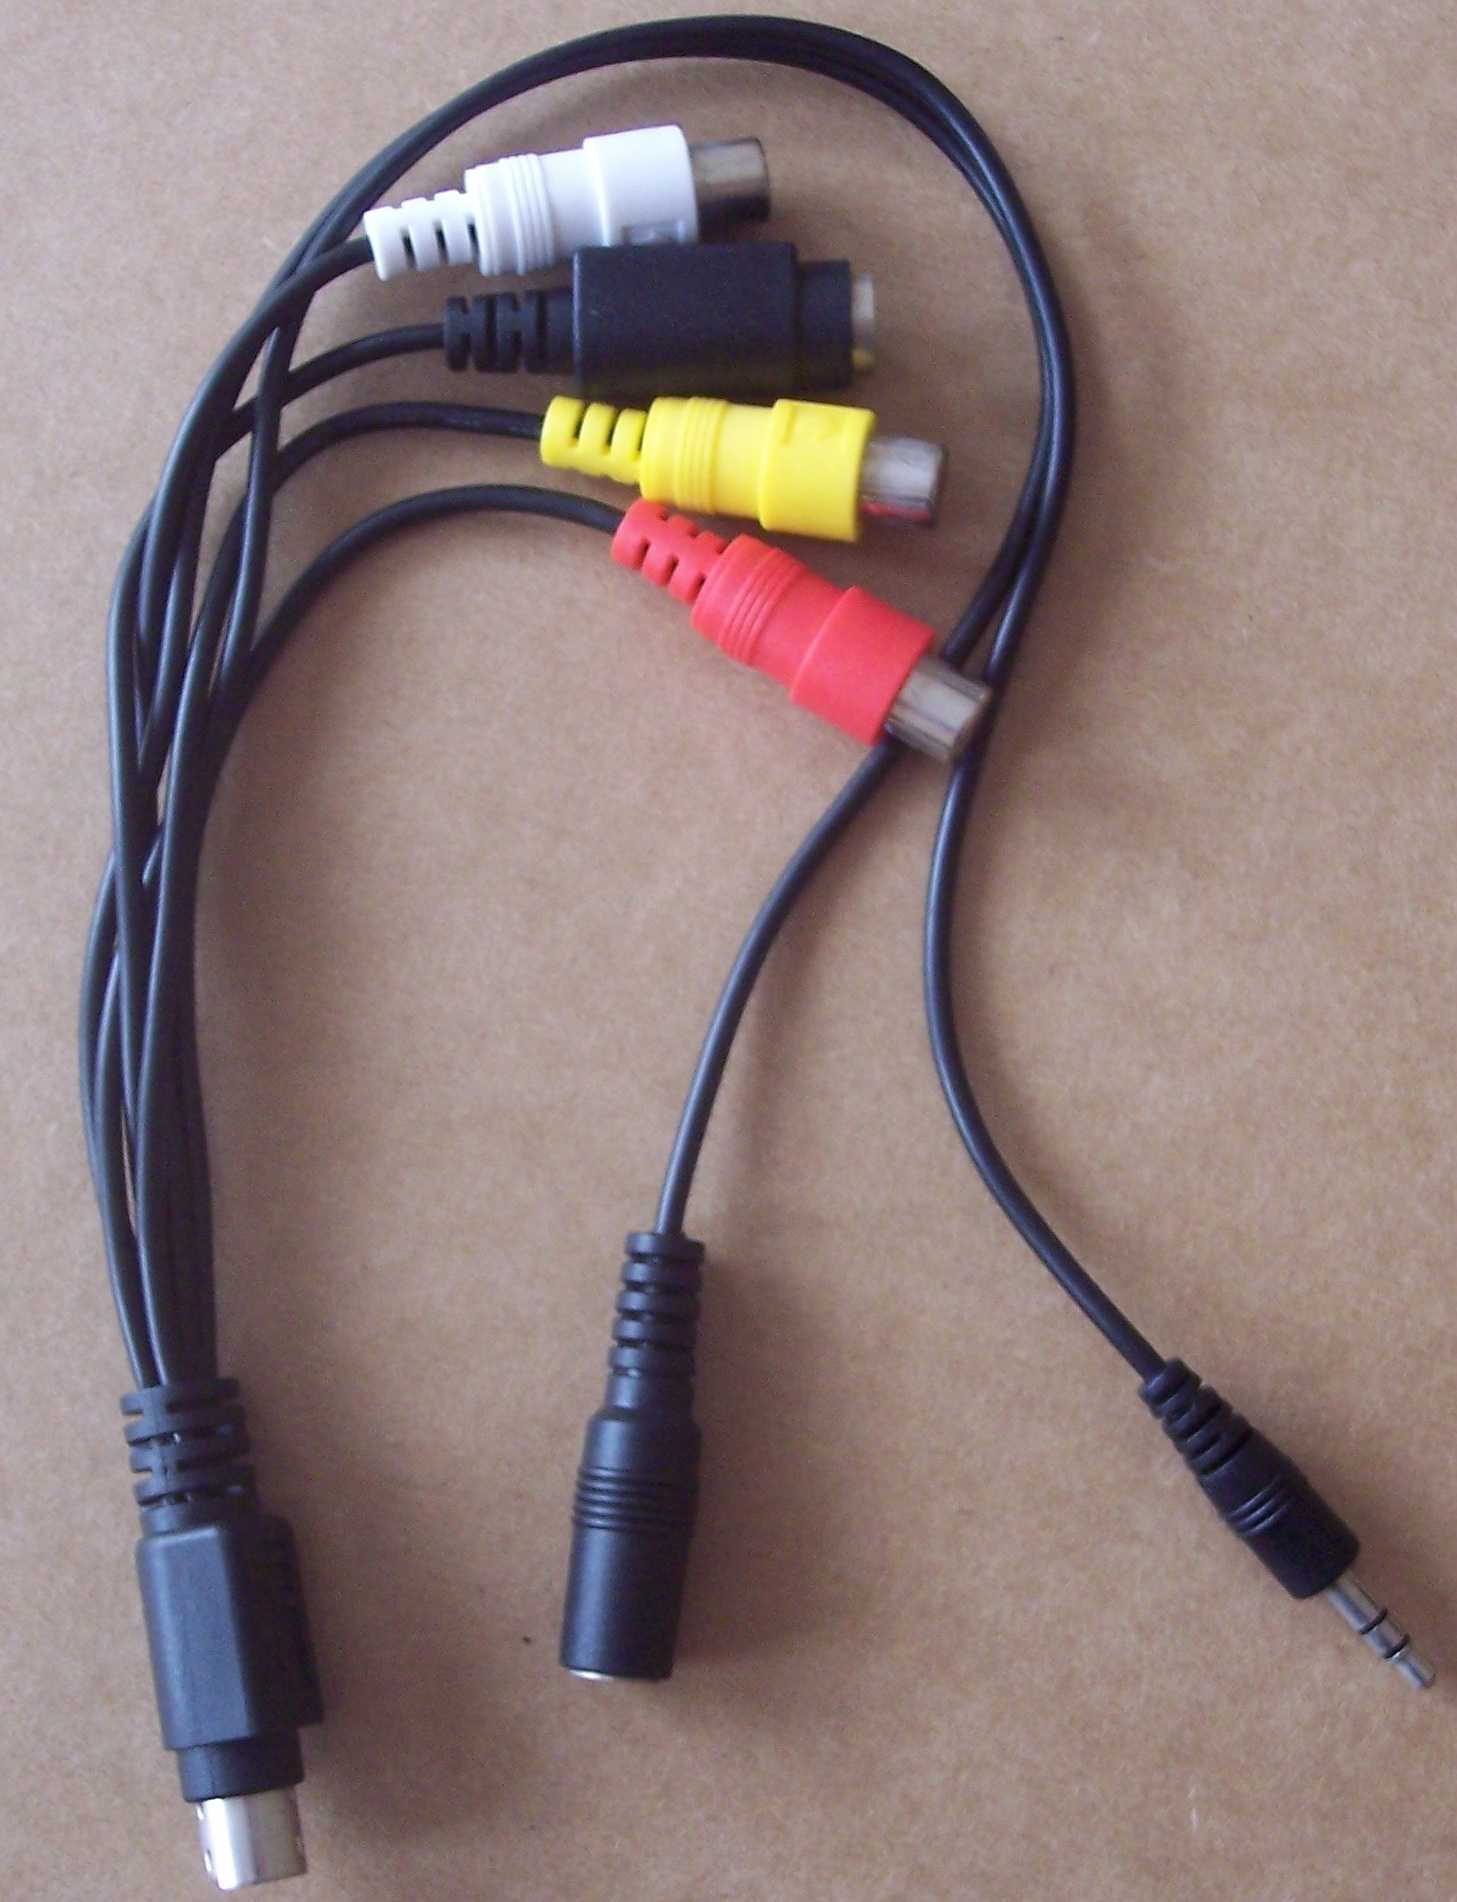 Supplied connector cables.